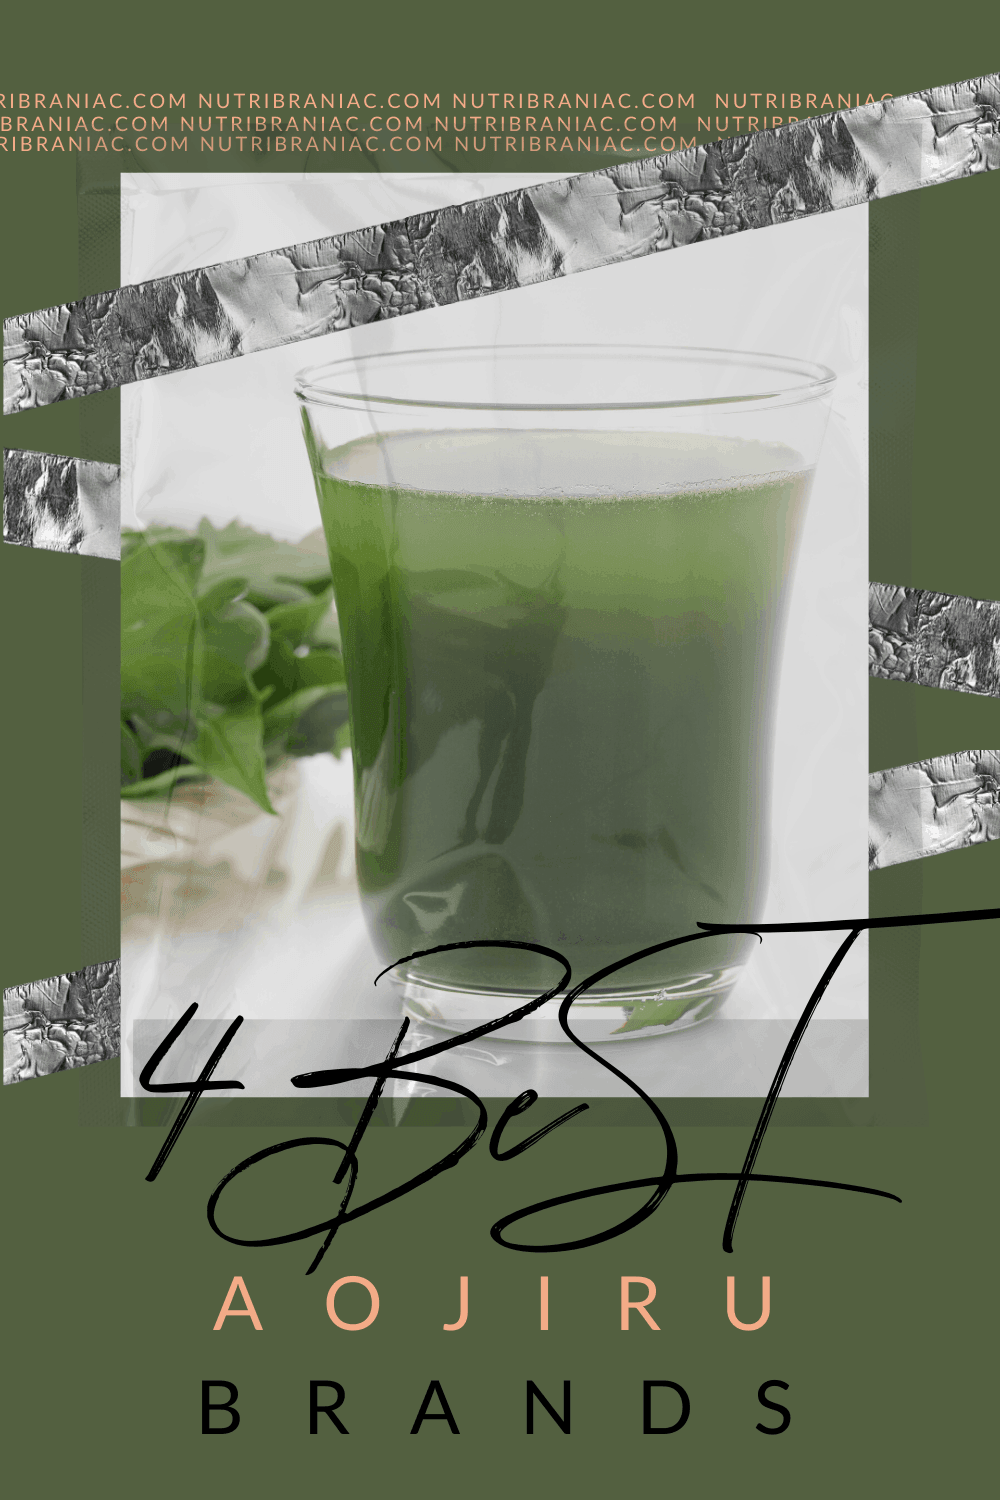 Graphic image of a glass of aojiru juice with text overlay "4 Best Aojiru Brands"